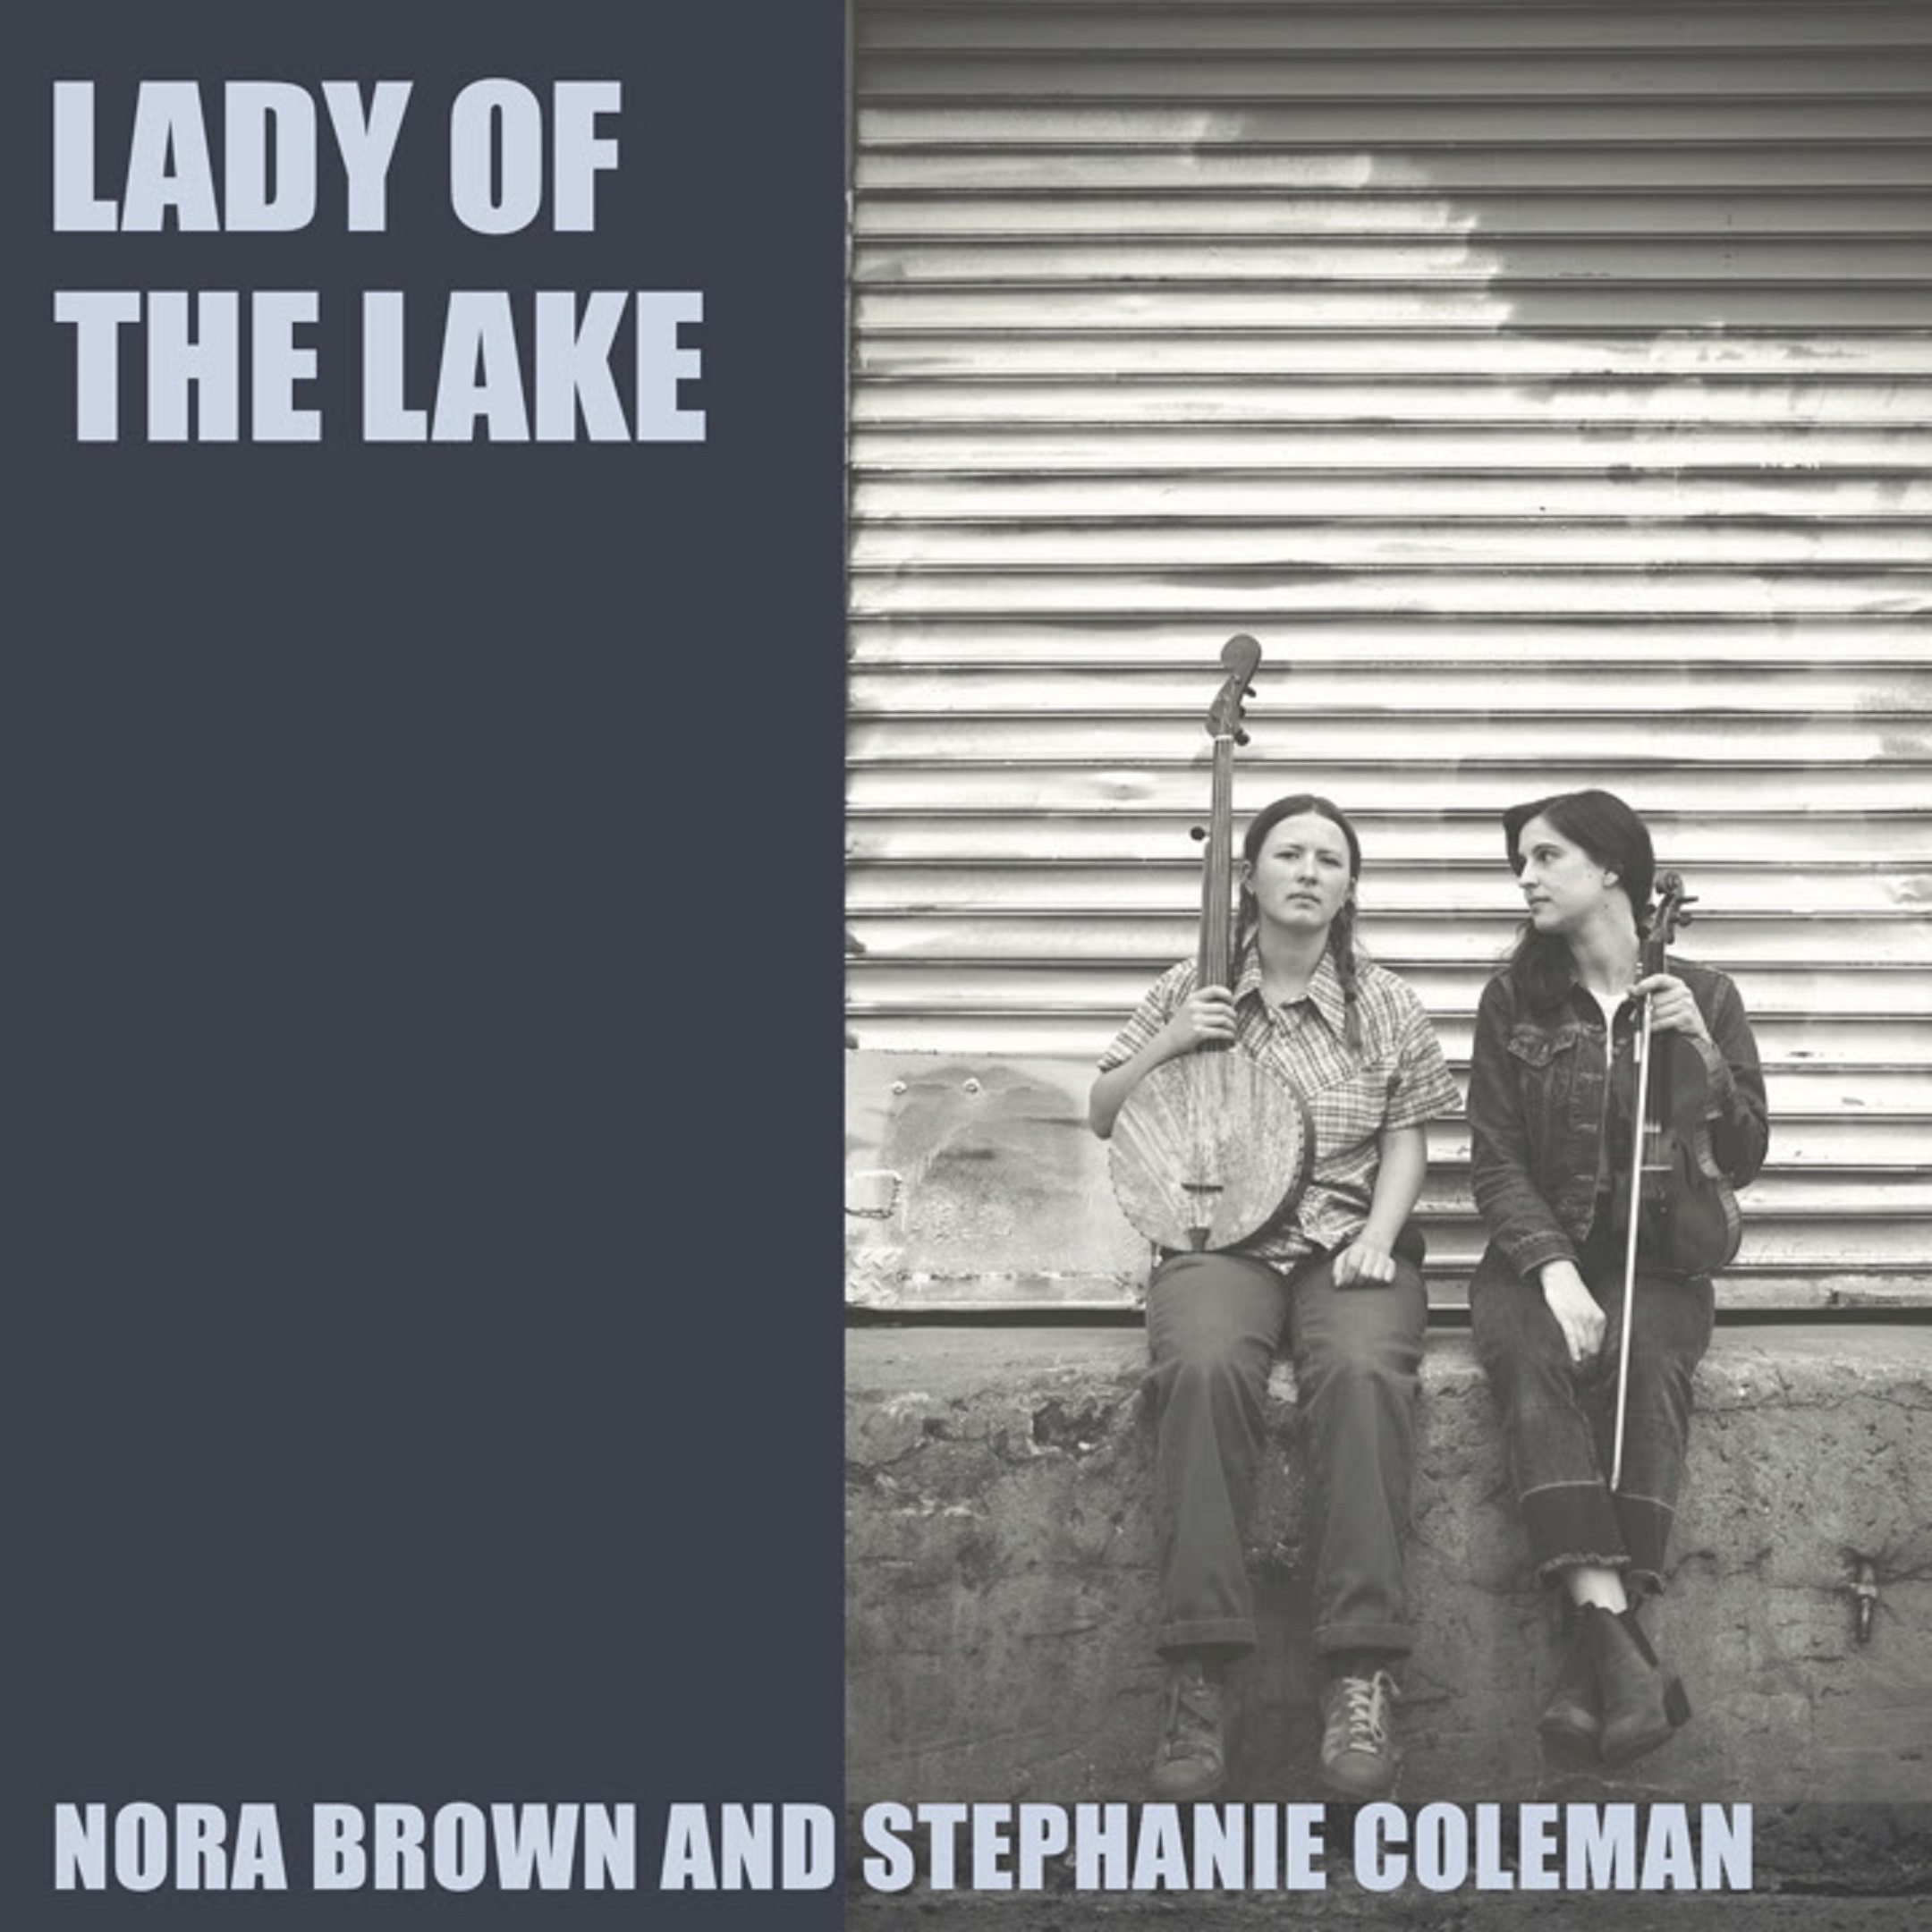 BROOKLYN’S 18-YEAR-OLD BANJOIST/VOCALIST NORA BROWN AND AWARD-WINNING FIDDLE PLAYER STEPHANIE COLEMAN TEAM UP FOR EP LADY OF THE LAKE, OUT JULY 28